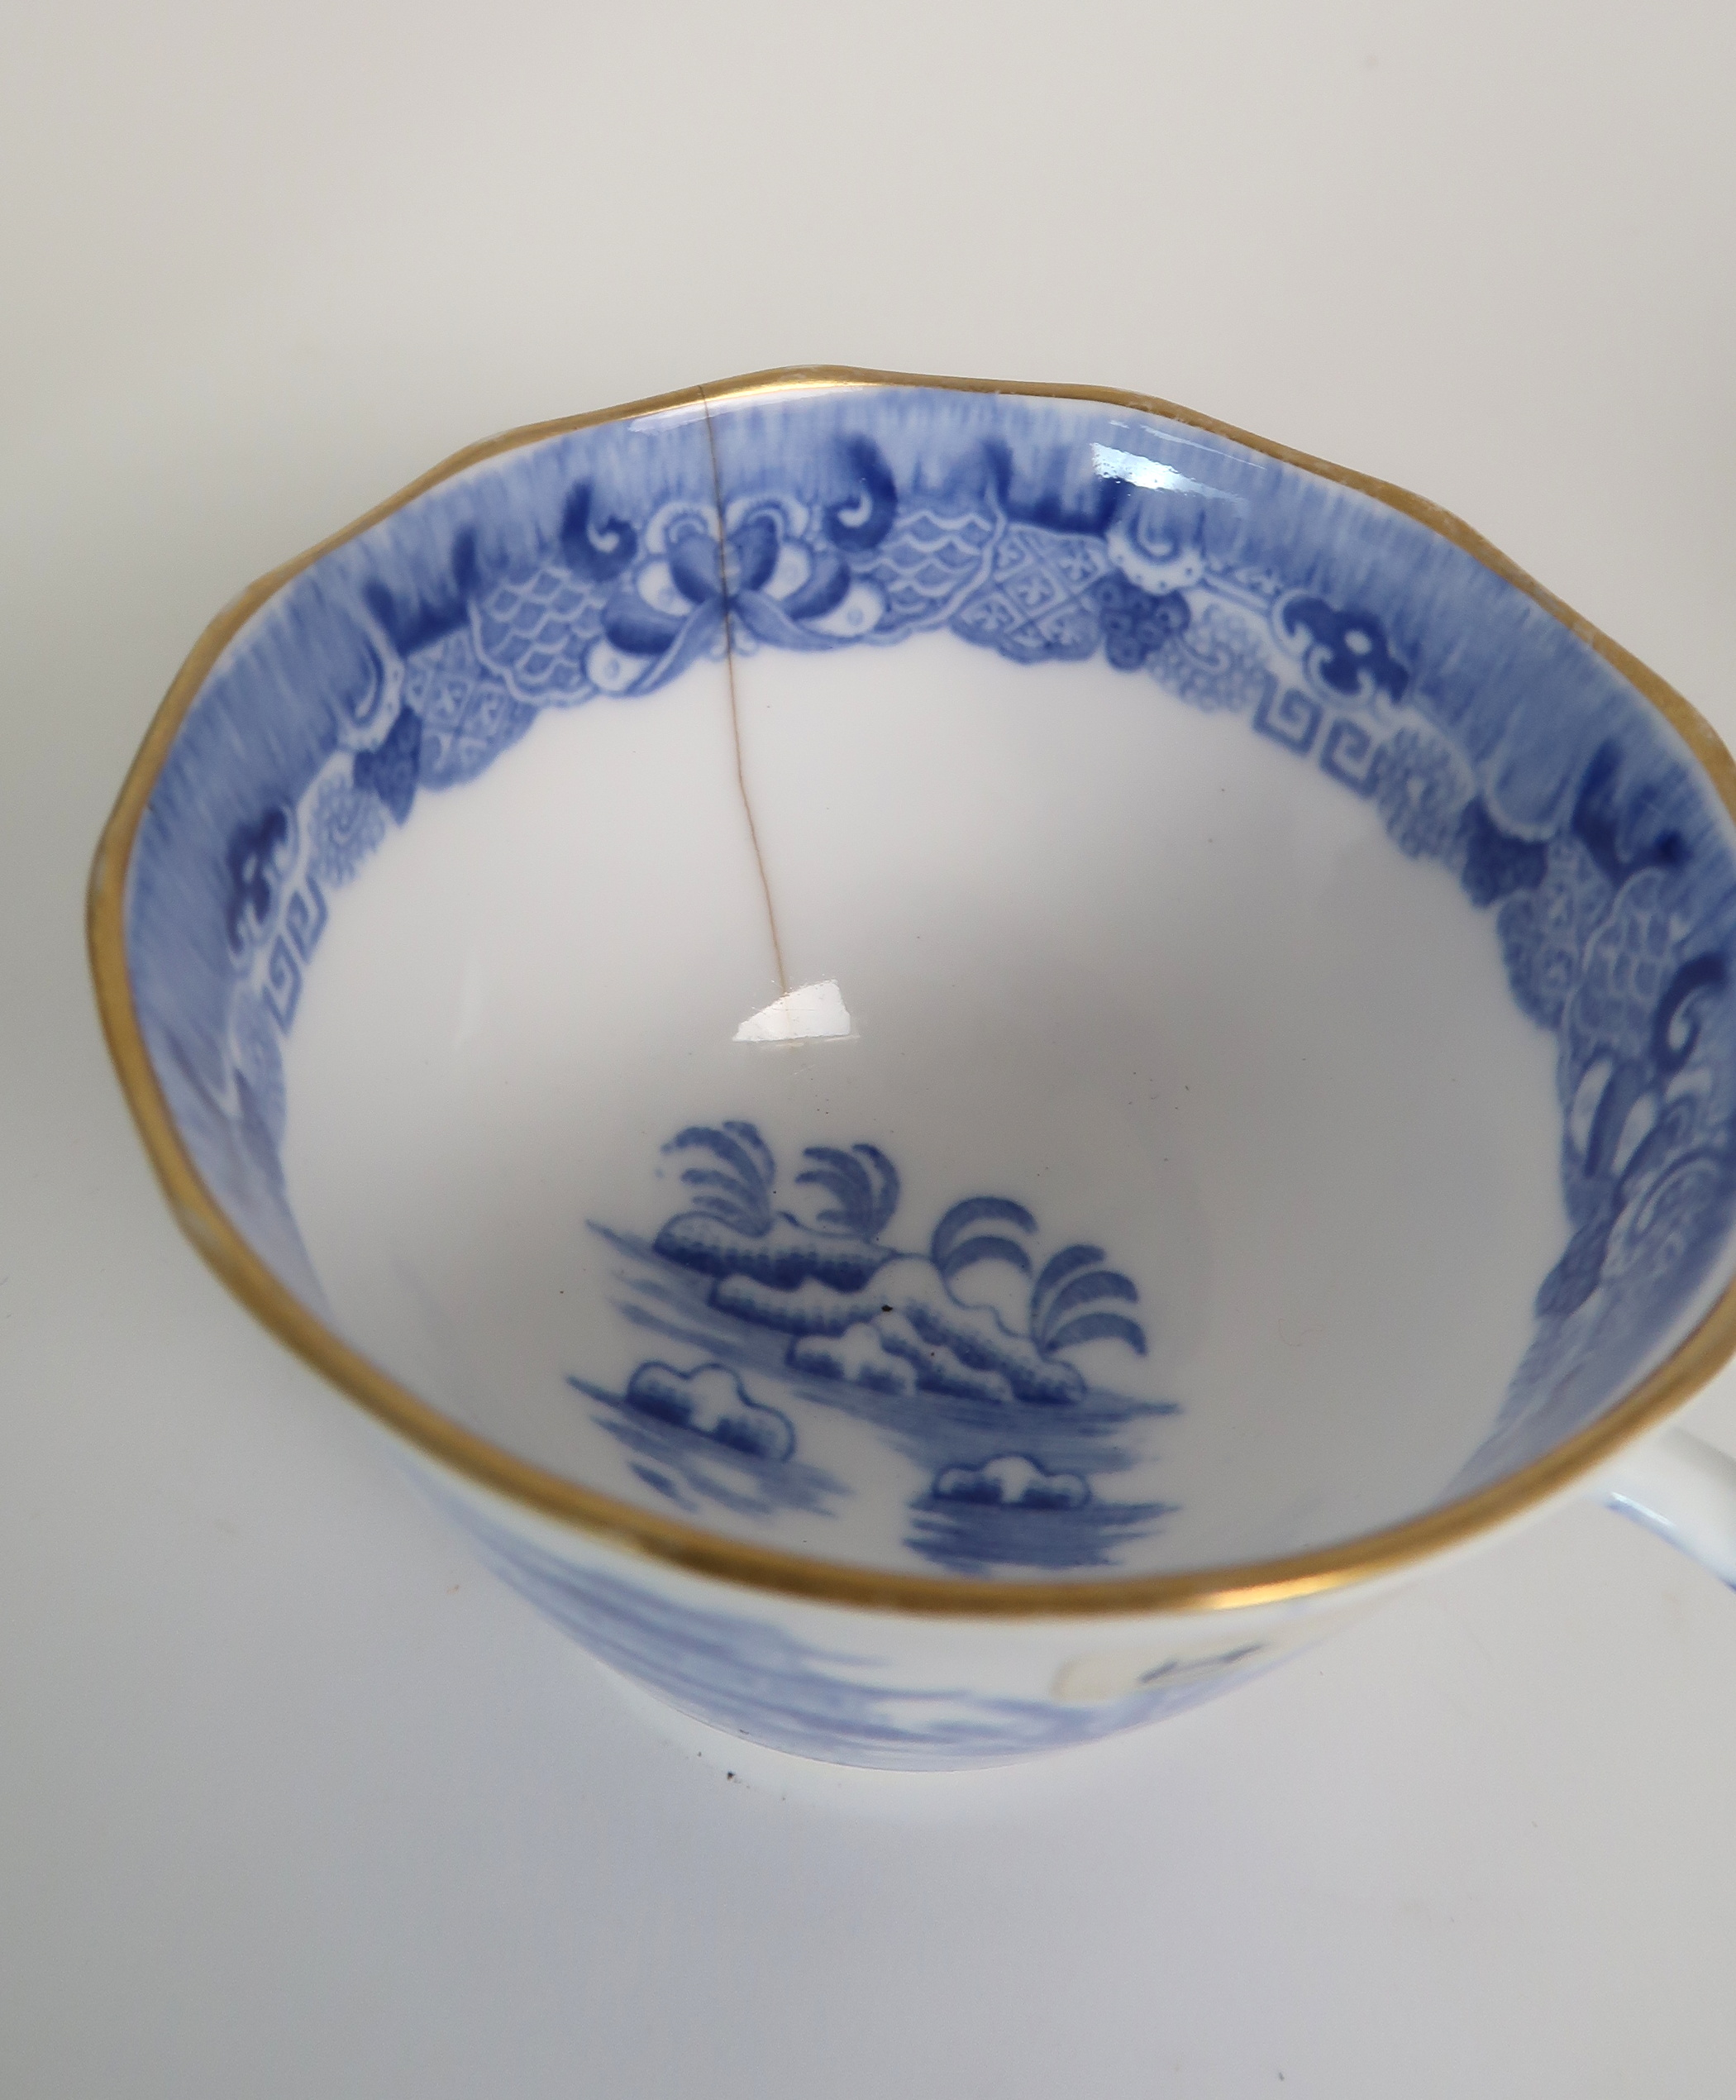 A COLLECTION OF ANTIQUE AND LATER ENGLISH BLUE AND WHITE PORCELAIN TEA/COFFEE WARES including - Image 7 of 20